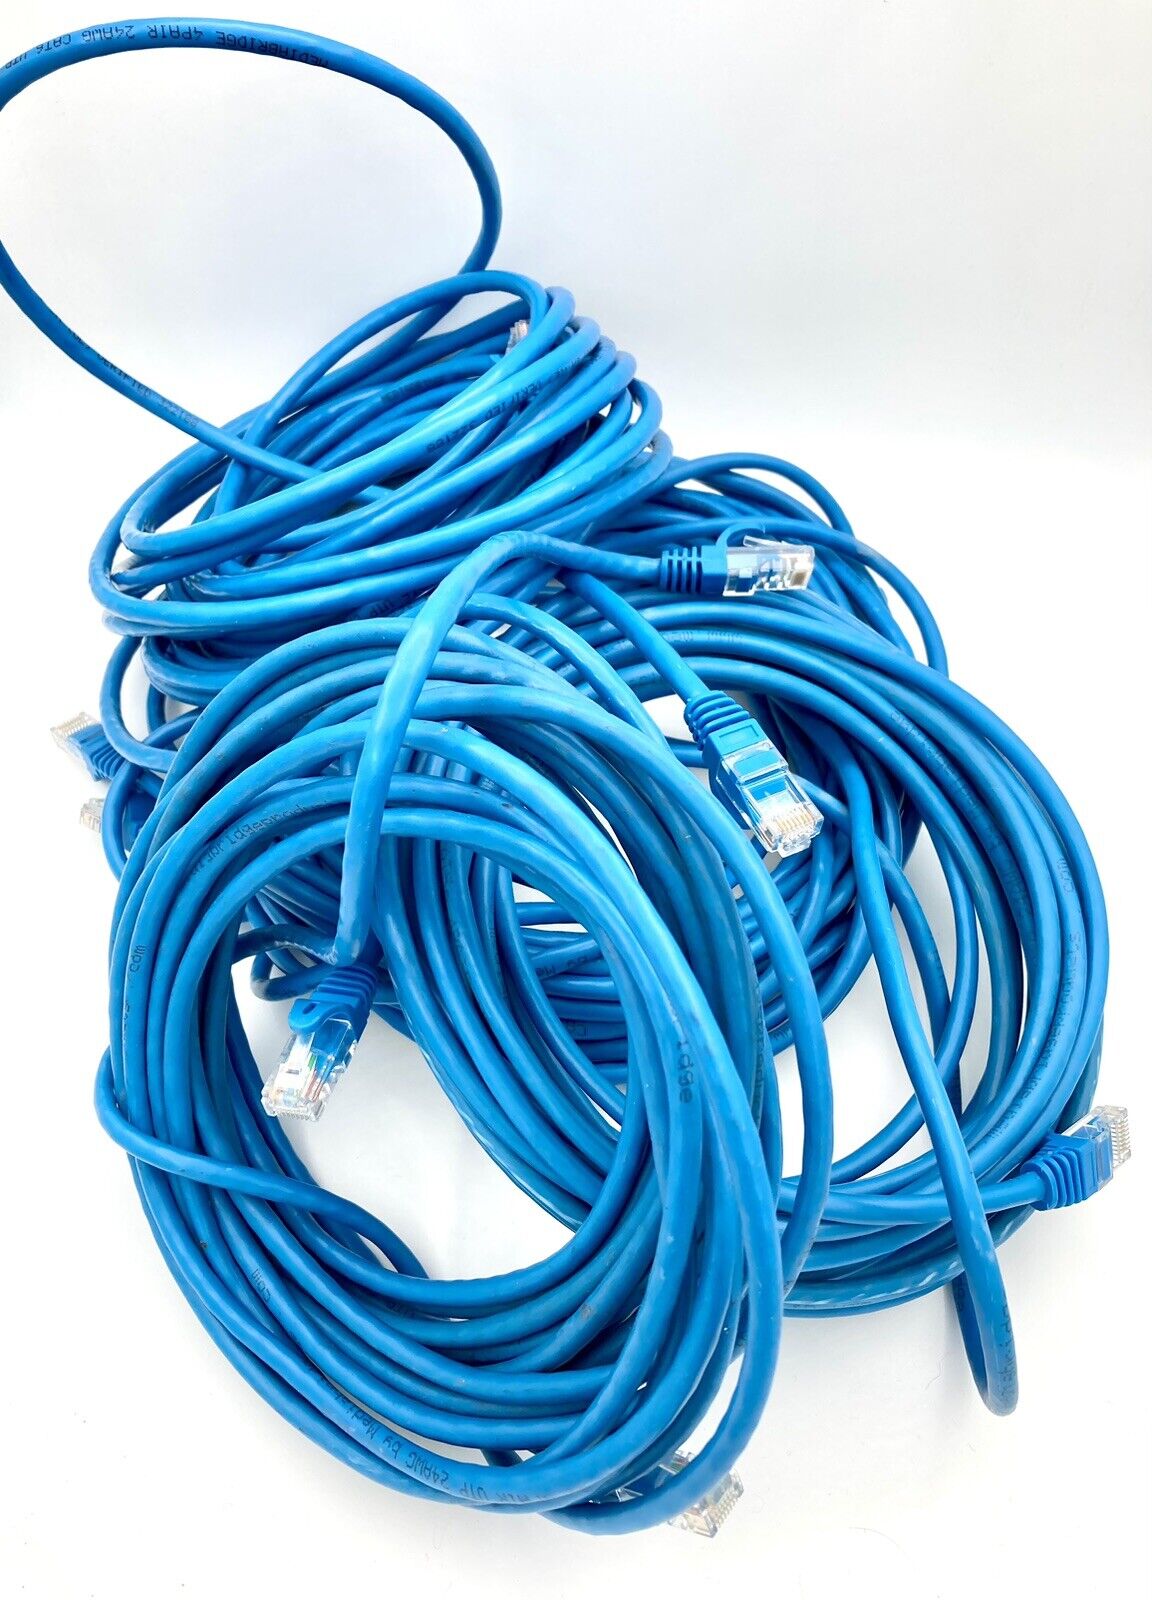 Huge Lot Of Cat5e Ethernet Cables - Various Lengths - Over 100 Ft